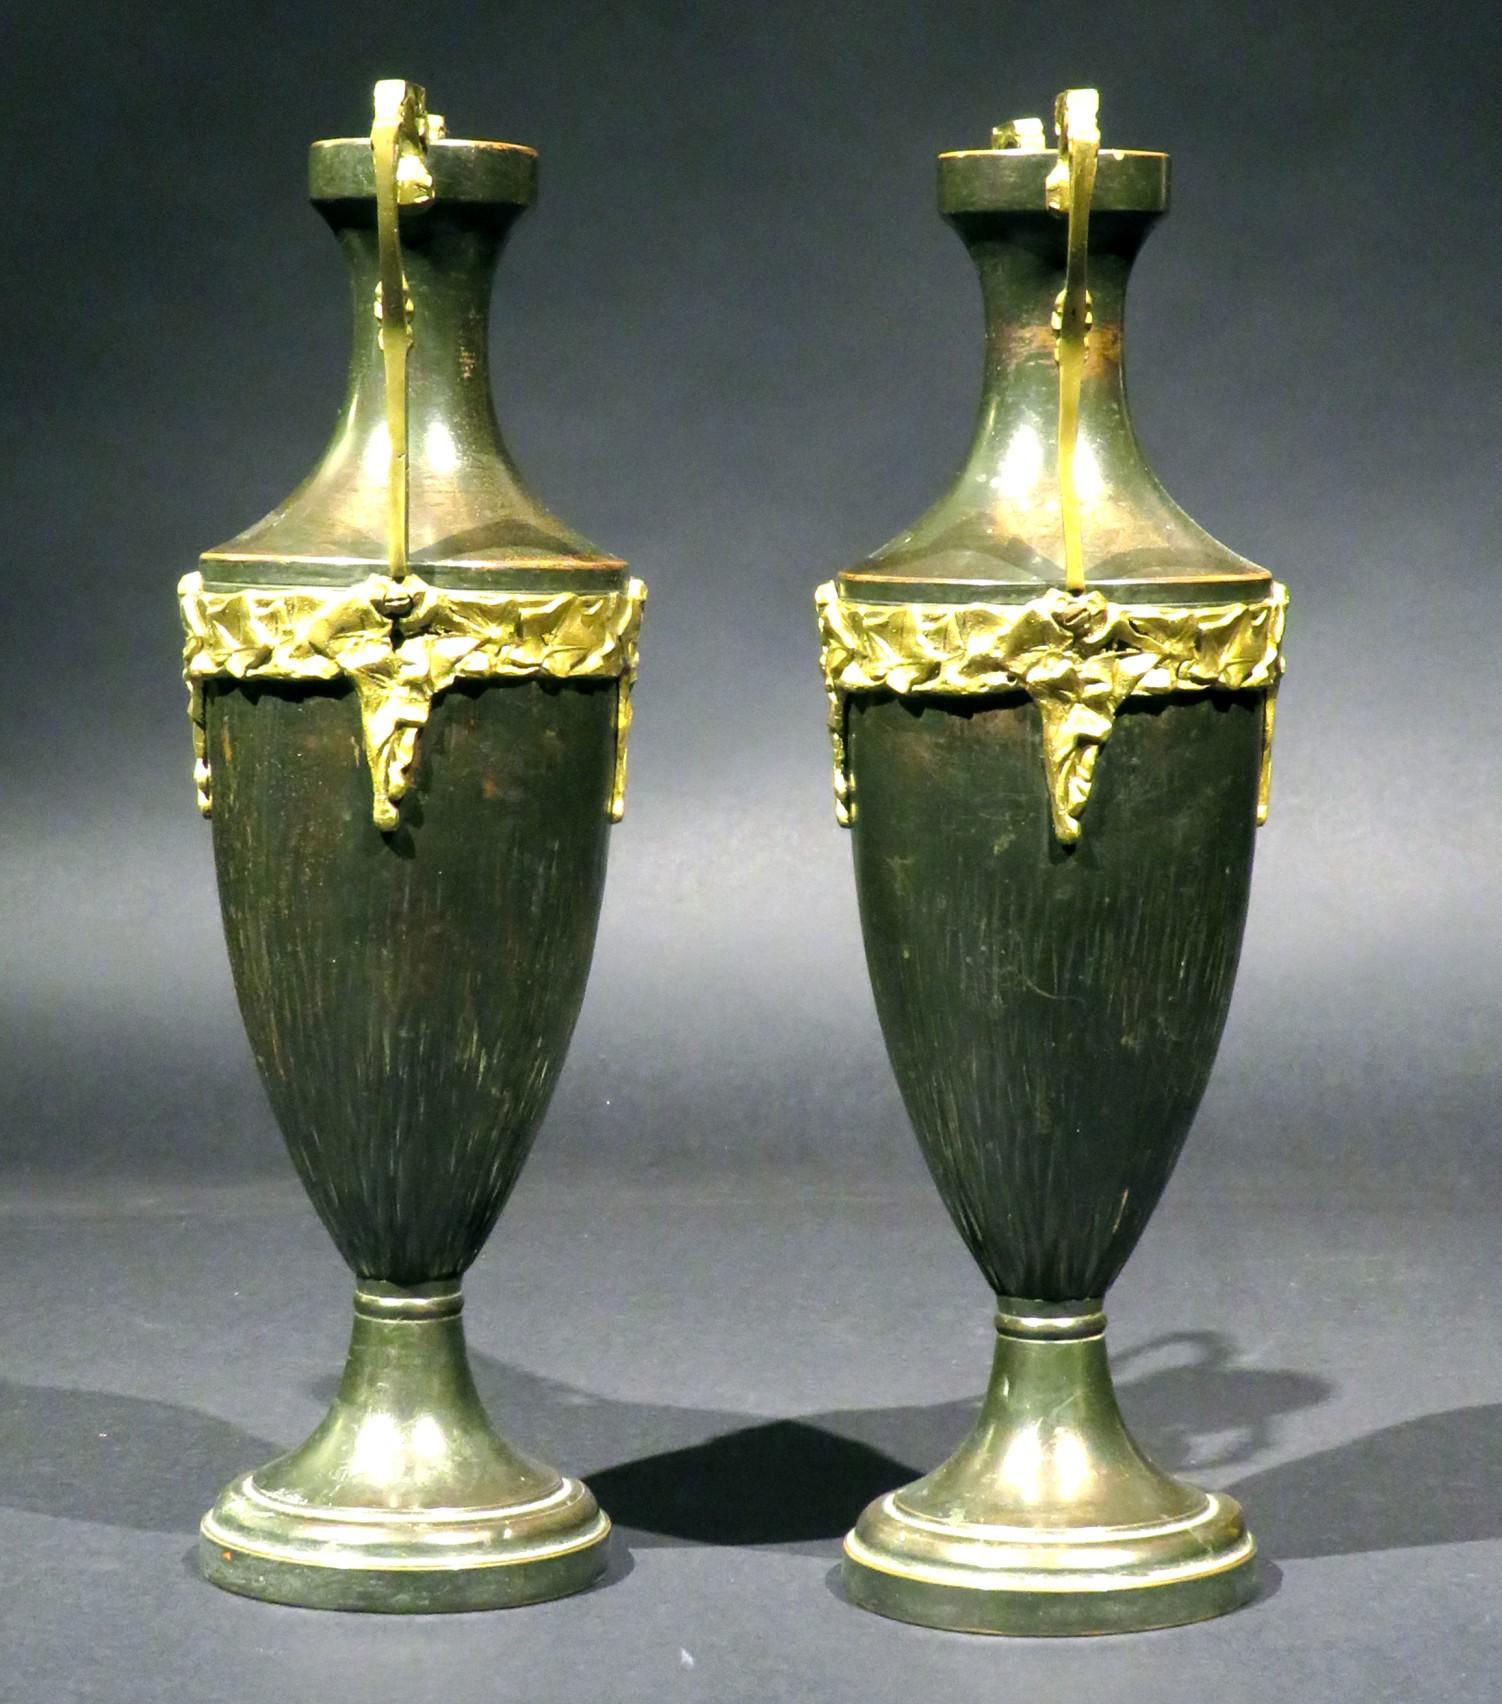 Fine Pair of Neoclassical Revival Bronze Patinated Copper Urns, Circa 1900 In Good Condition For Sale In Ottawa, Ontario